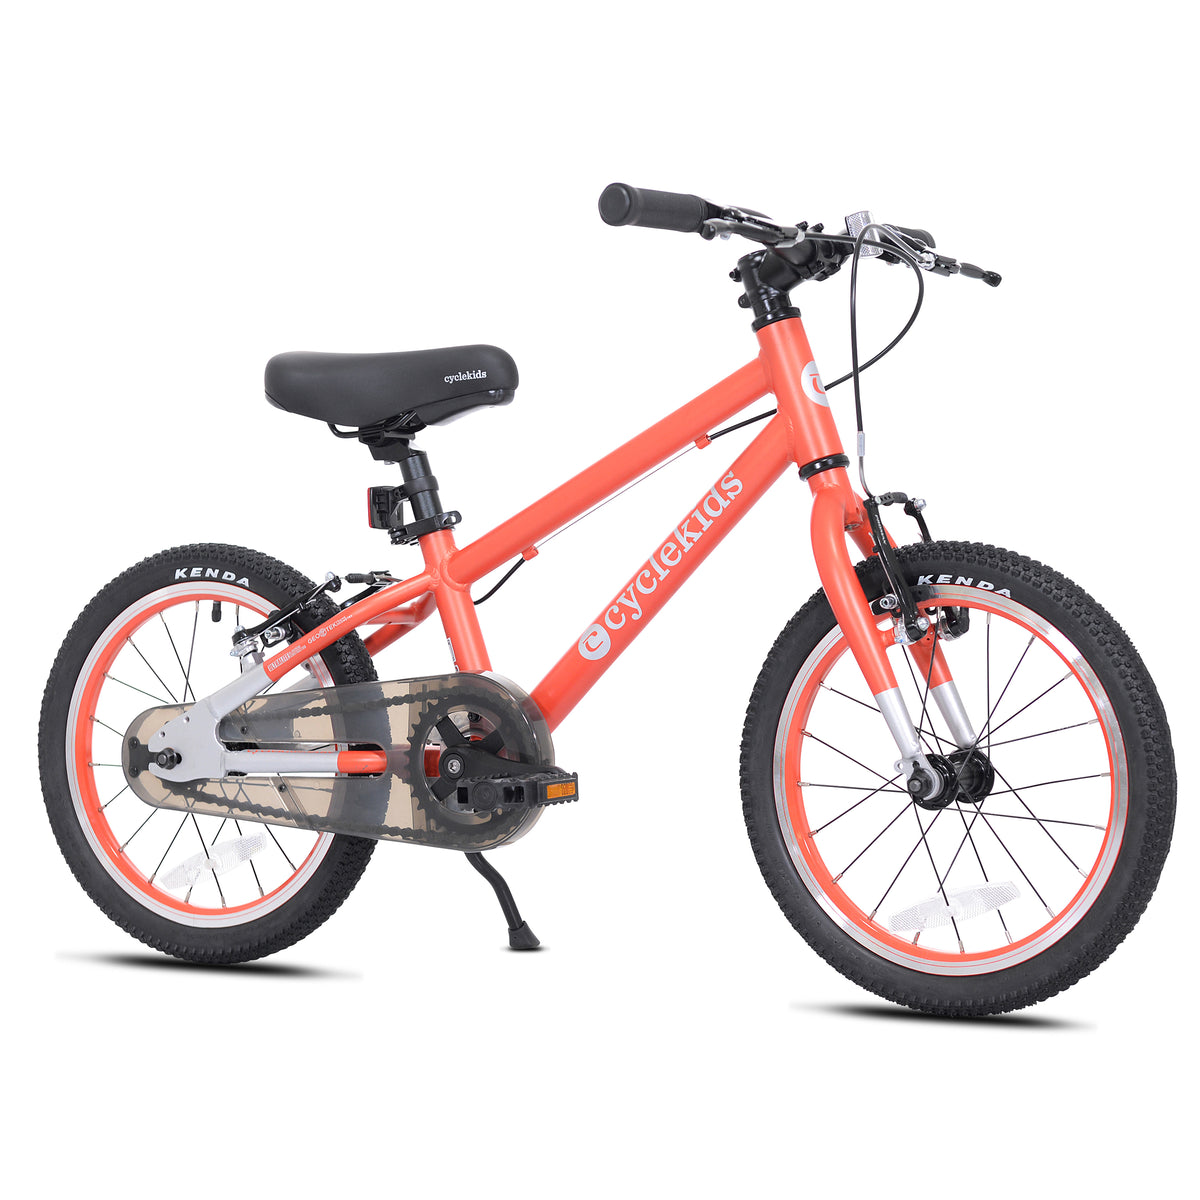 16" CYCLE Kids™ | Bike for Kids Ages 4-6